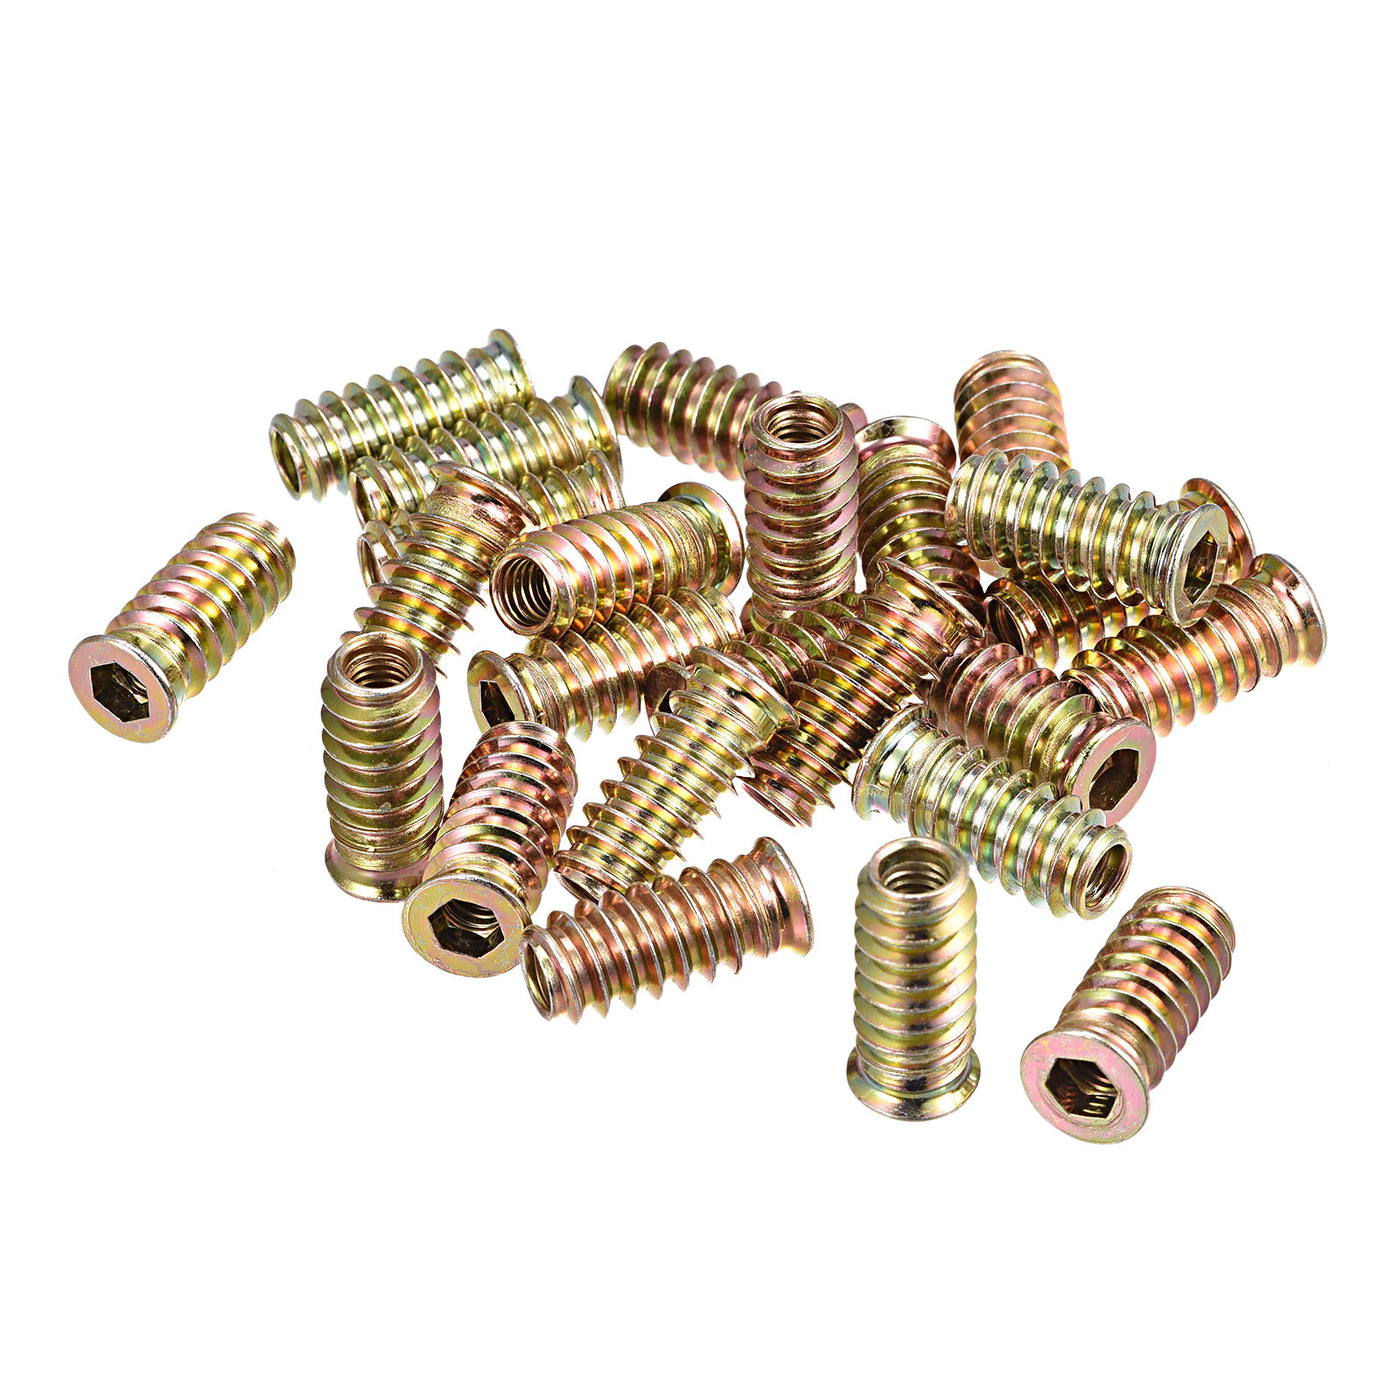 uxcell Uxcell M6x25mm Threaded Inserts for Wood Hex Socket Drive Furniture Screw-in Nut 24pcs